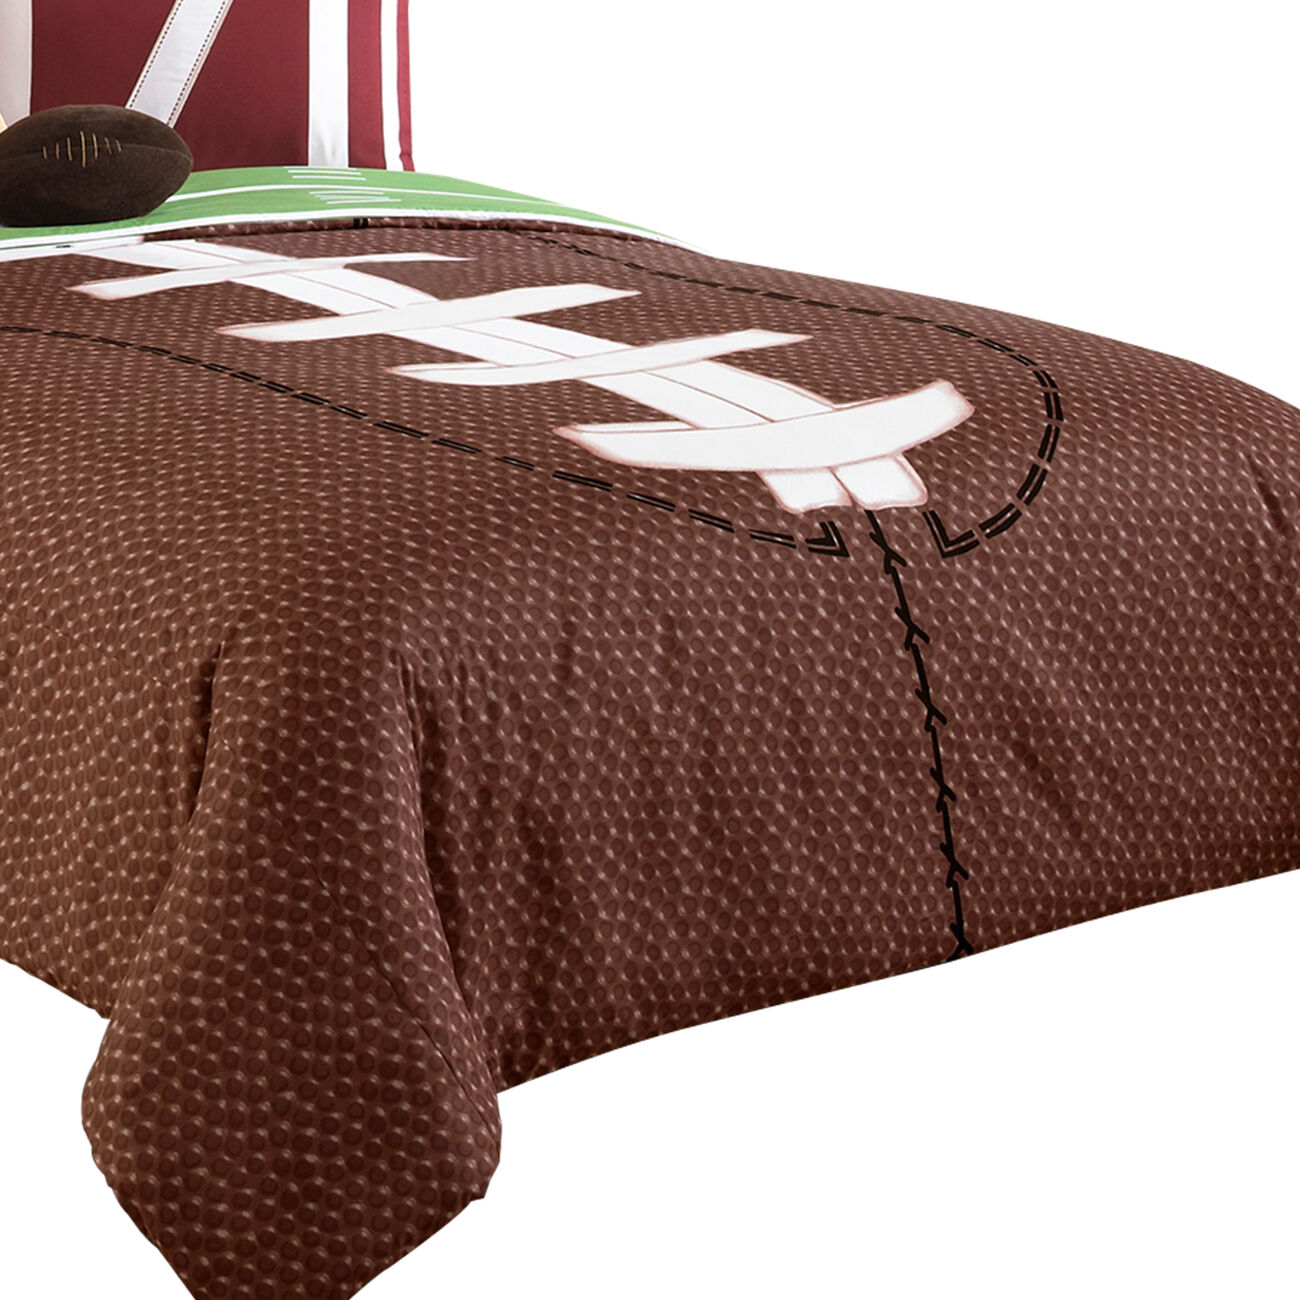 5 Piece Twin Comforter Set with Football Field Print, Brown and Green